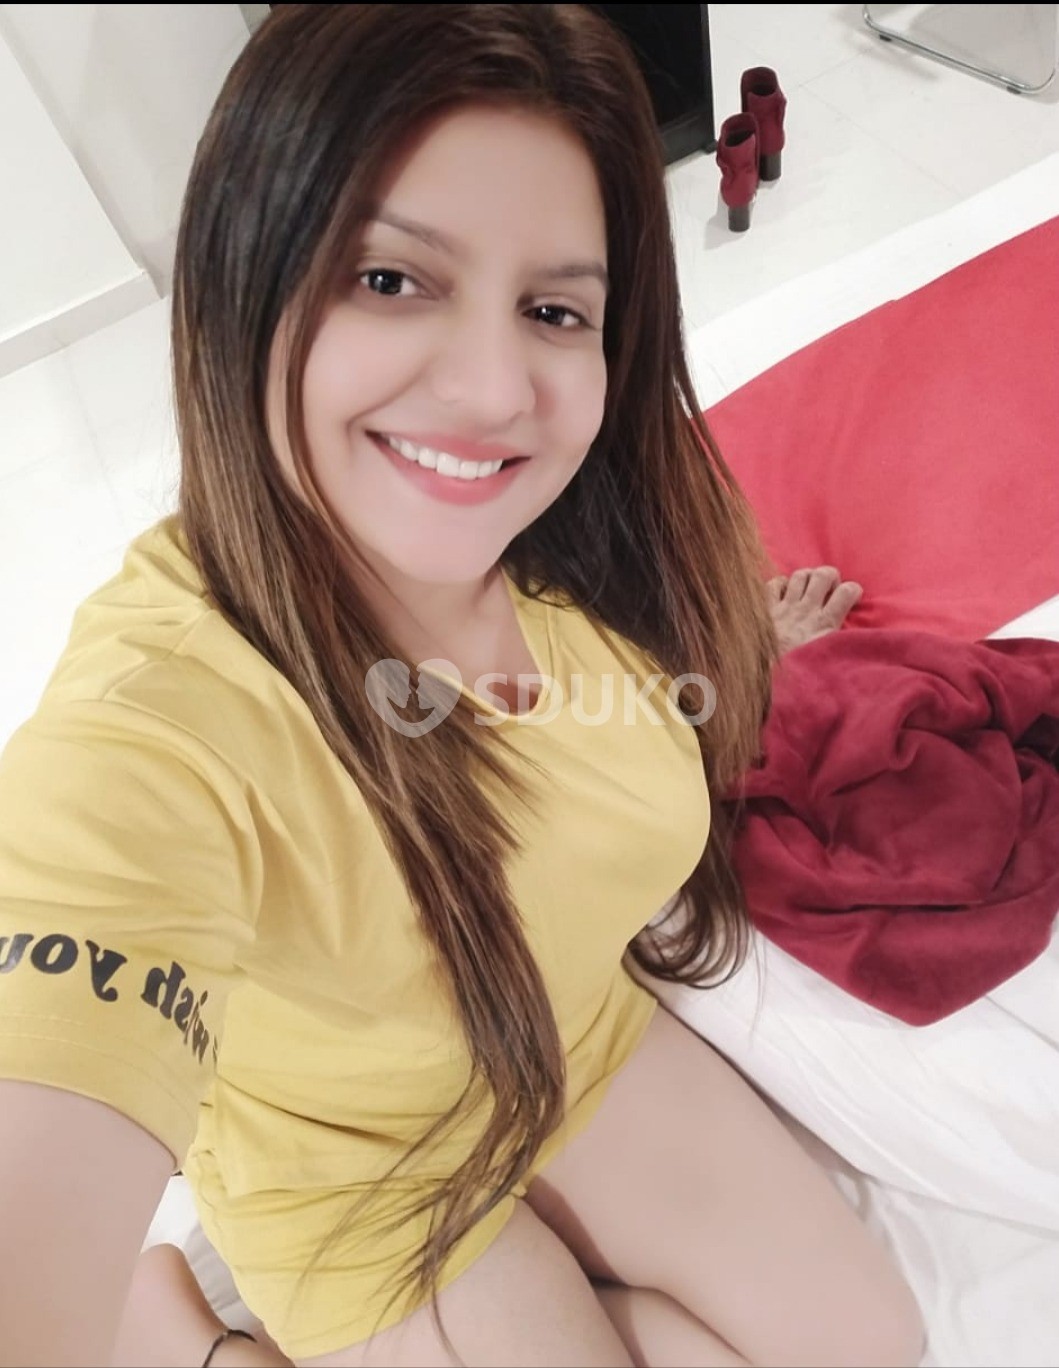 RAIGARH HOT AND HIGH PROFILE VIP CALL 24 X 7 HRS AVAILABLE ANAL ORAL BLOWJOB SEX